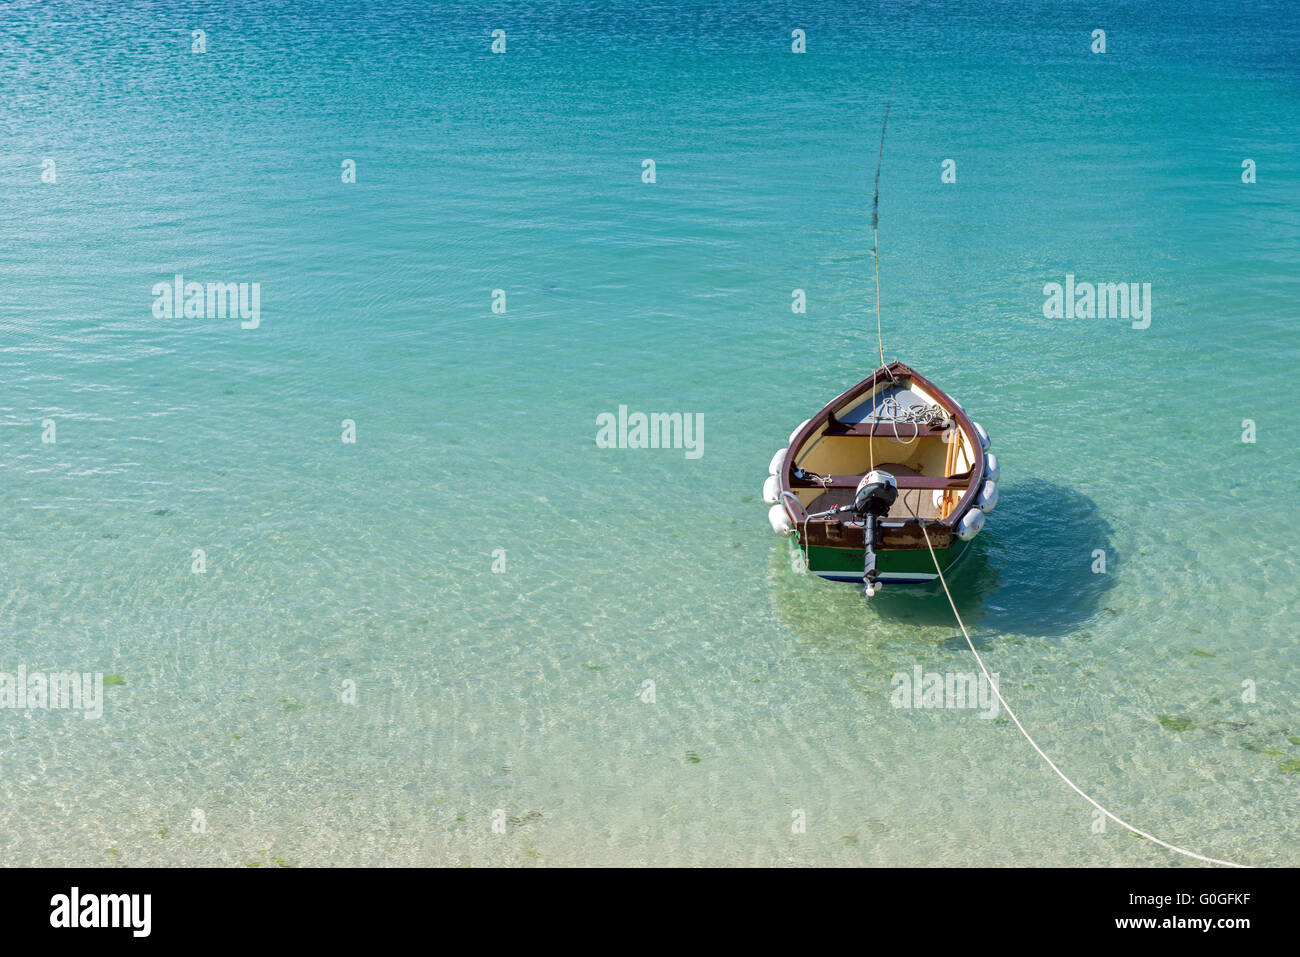 Solitary Dinghy Boat on a clear aquamarine sea with mooring rope Stock Photo